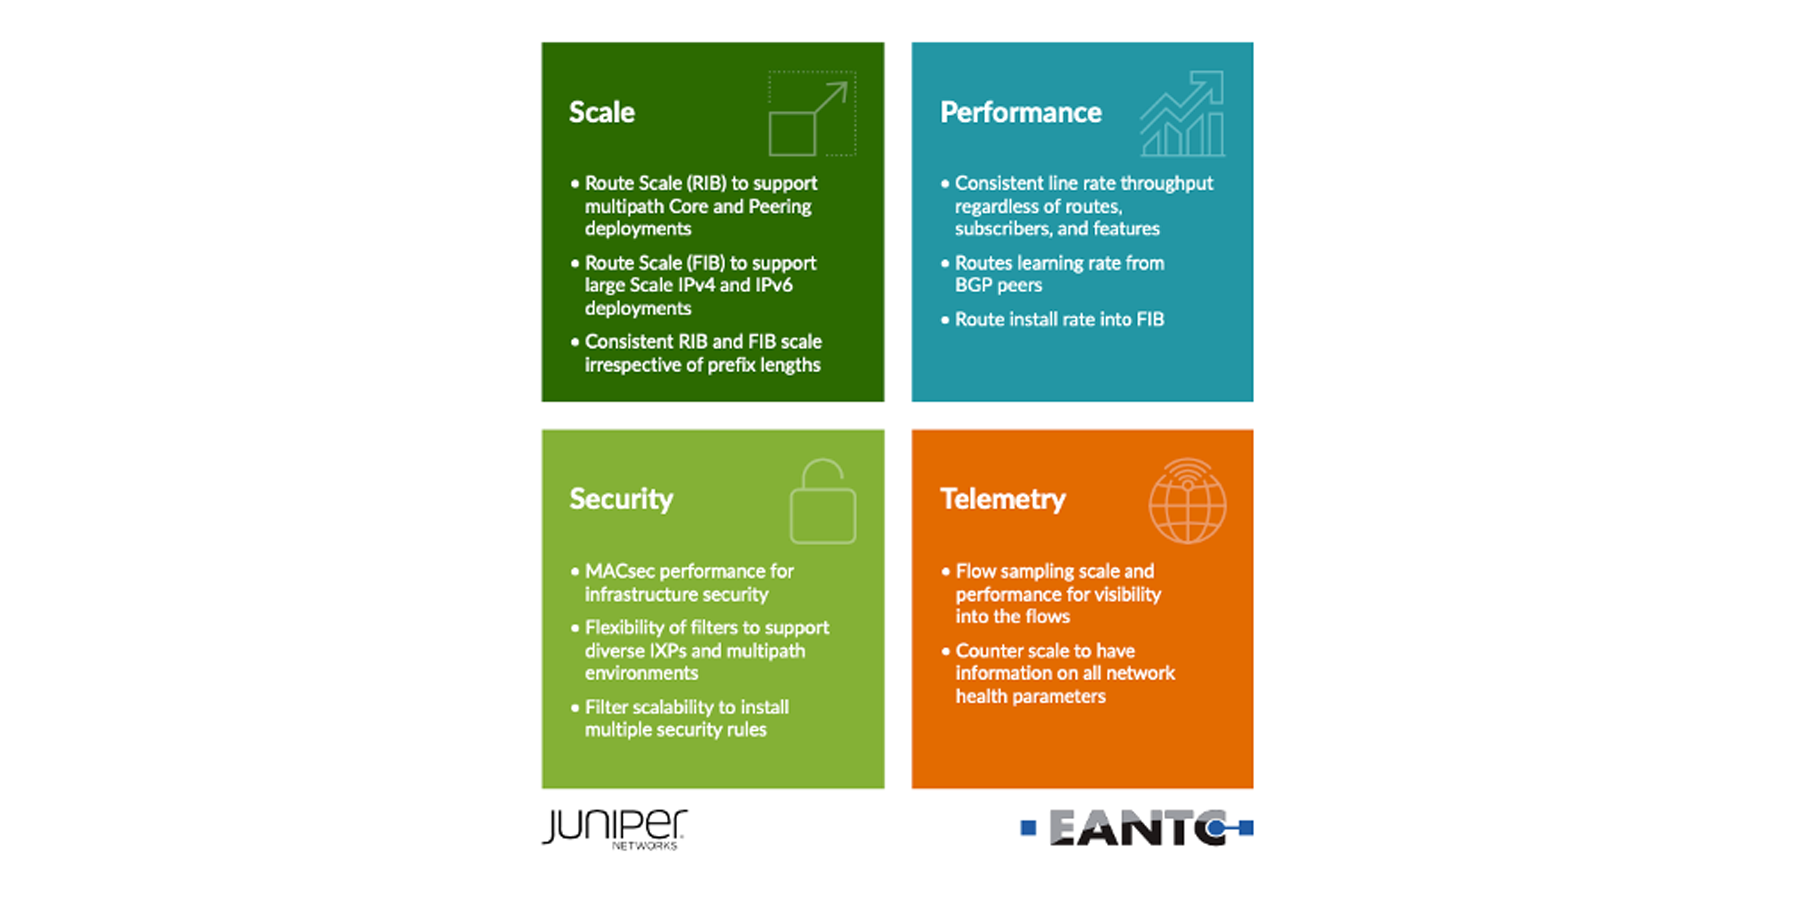 New EANTC Report Shows Juniper Significantly Outpaces Cisco in Core and Peering Benchmarks